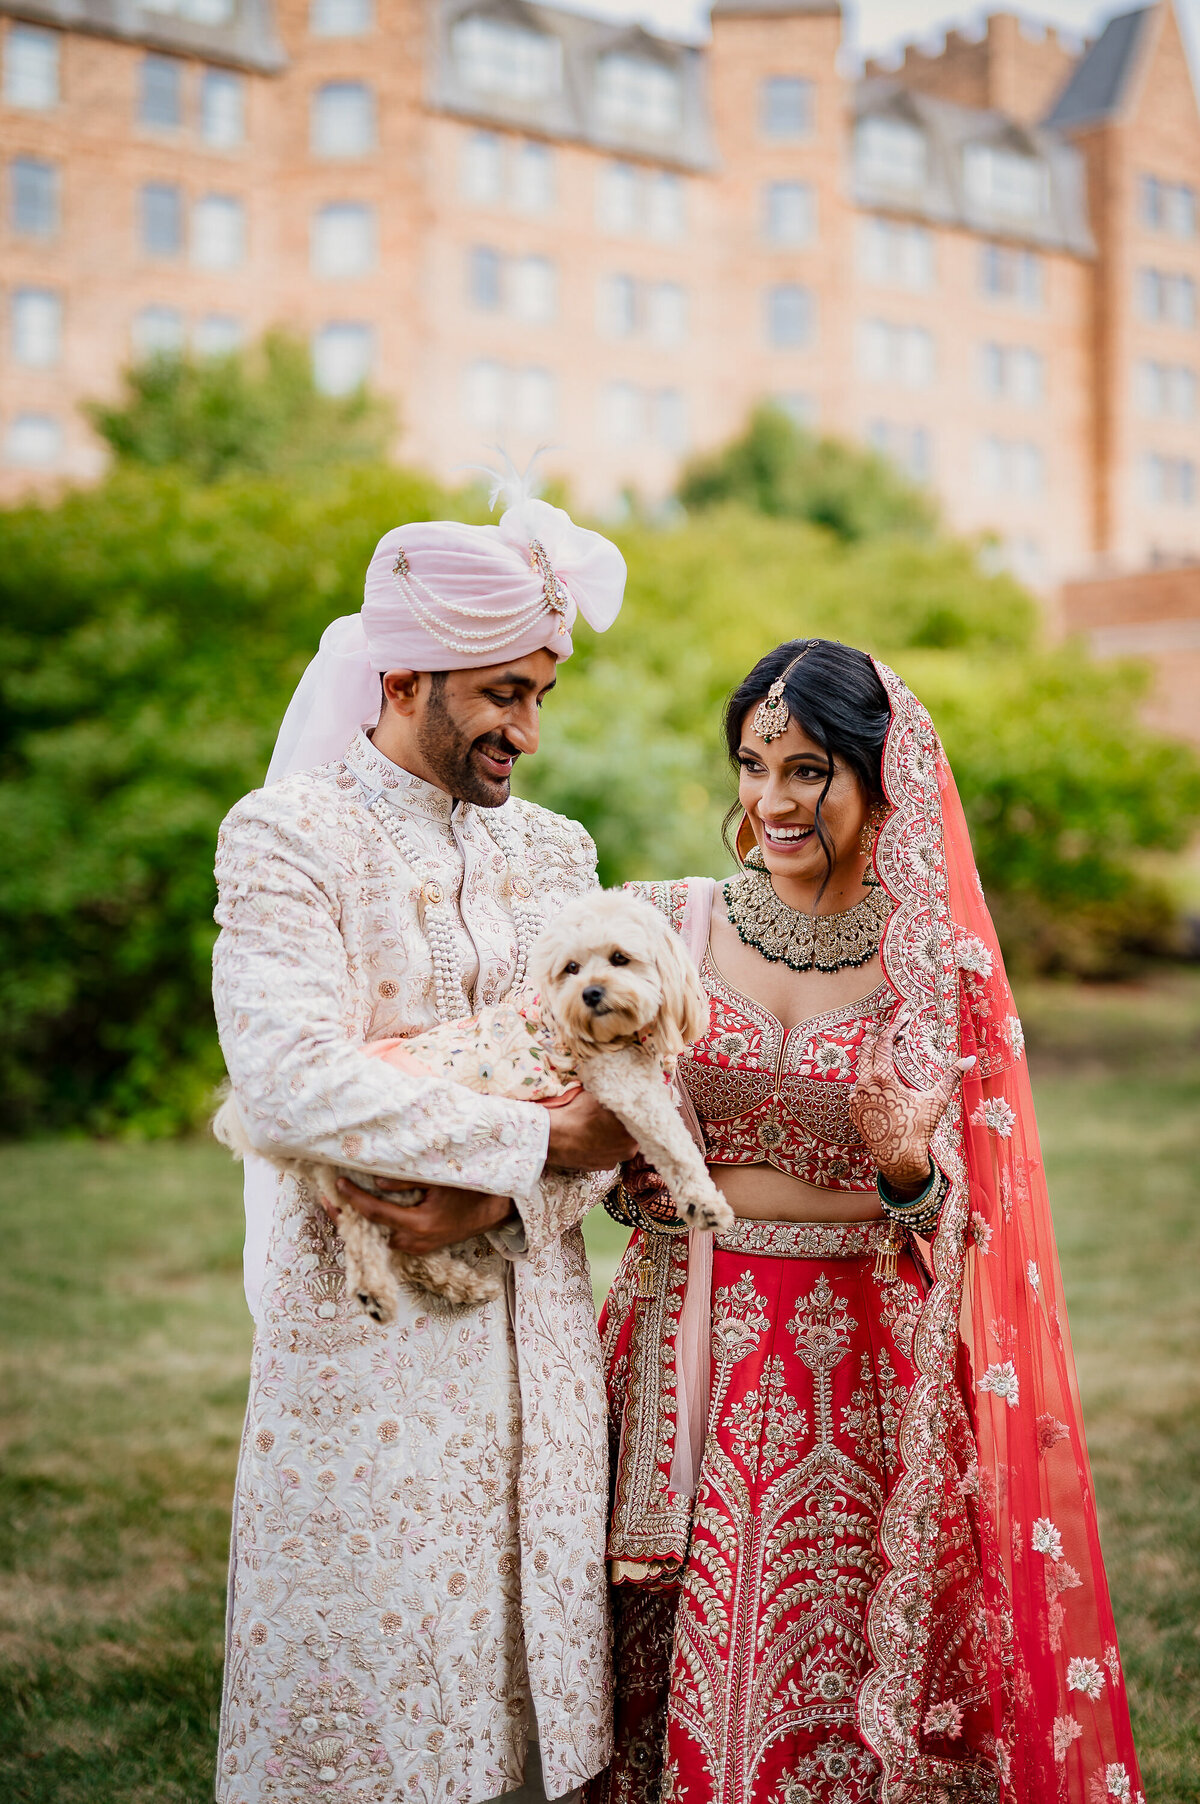 Explore the best NJ & NYC venues for your Indian wedding.